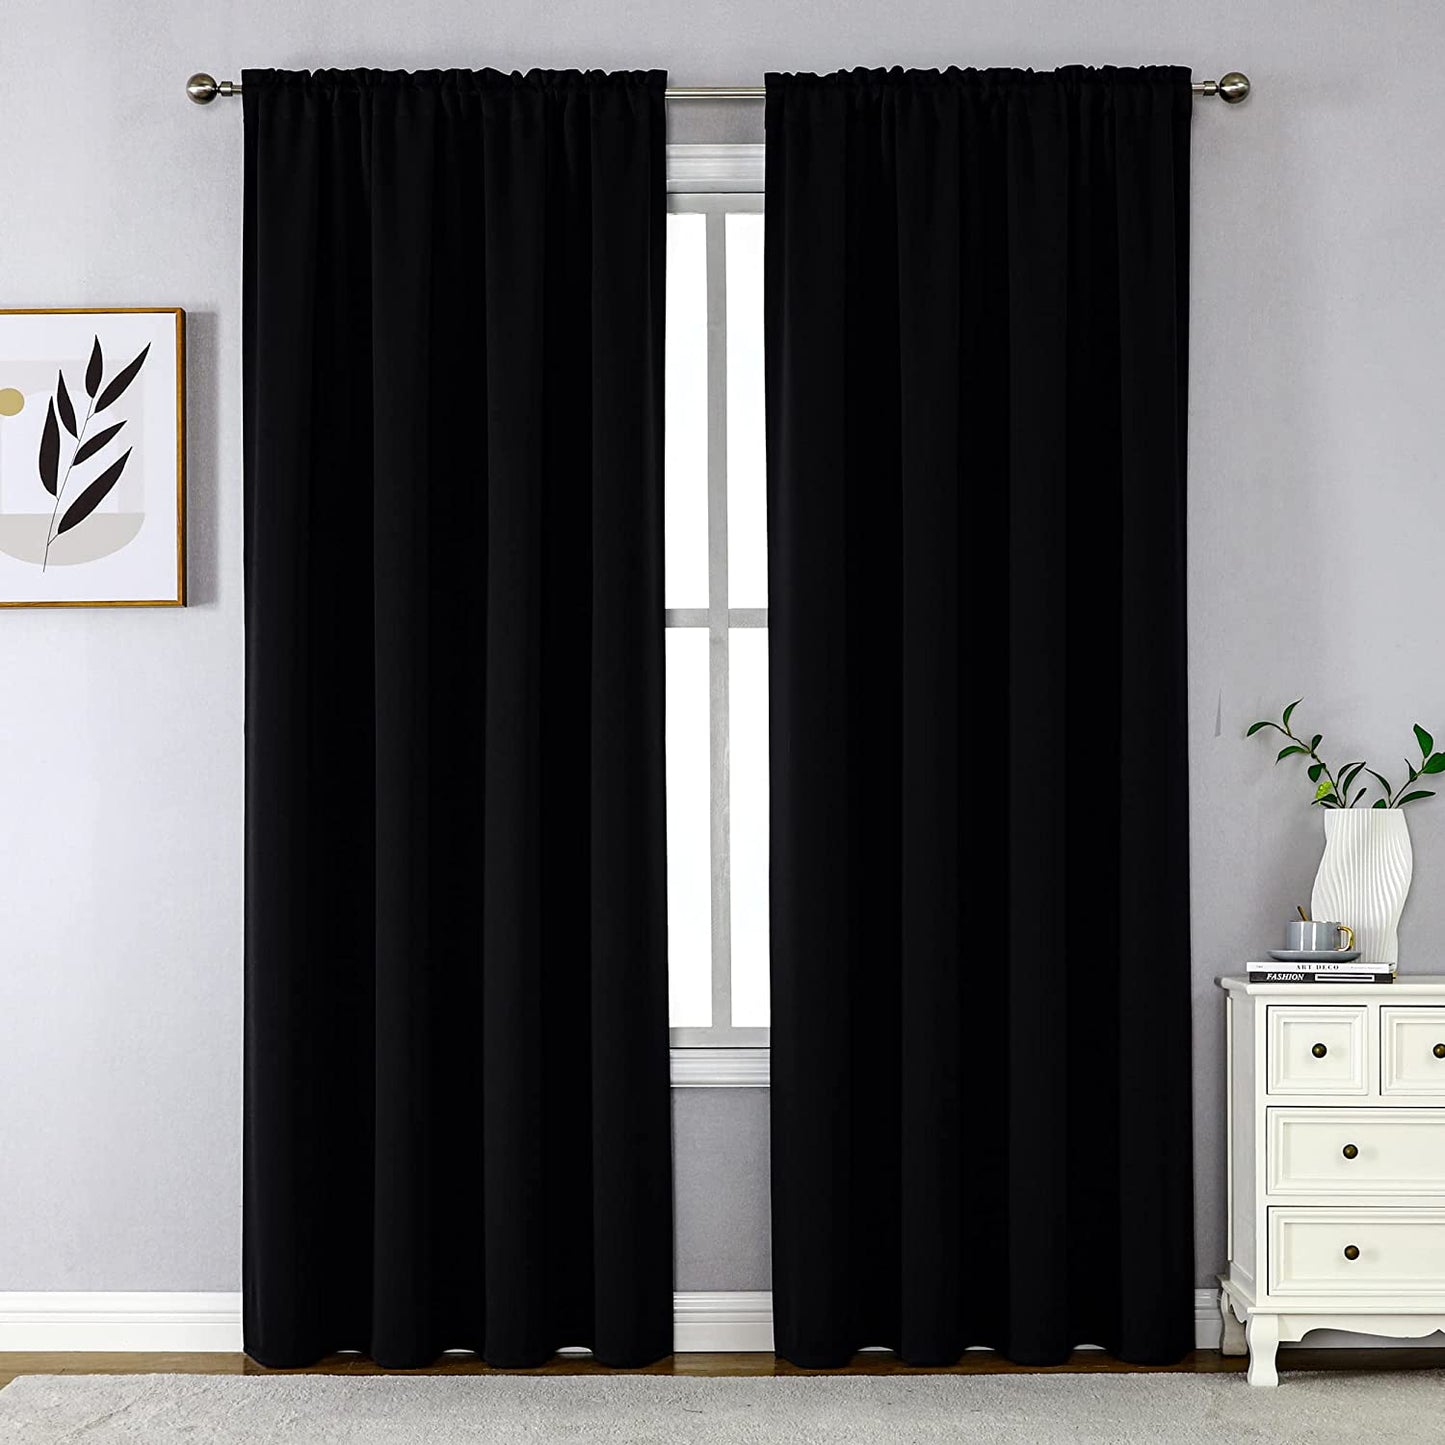 CUCRAF Blackout Curtains 84 Inches Long for Living Room, Light Beige Room Darkening Window Curtain Panels, Rod Pocket Thermal Insulated Solid Drapes for Bedroom, 52X84 Inch, Set of 2 Panels  CUCRAF Black 52W X 95L Inch 2 Panels 